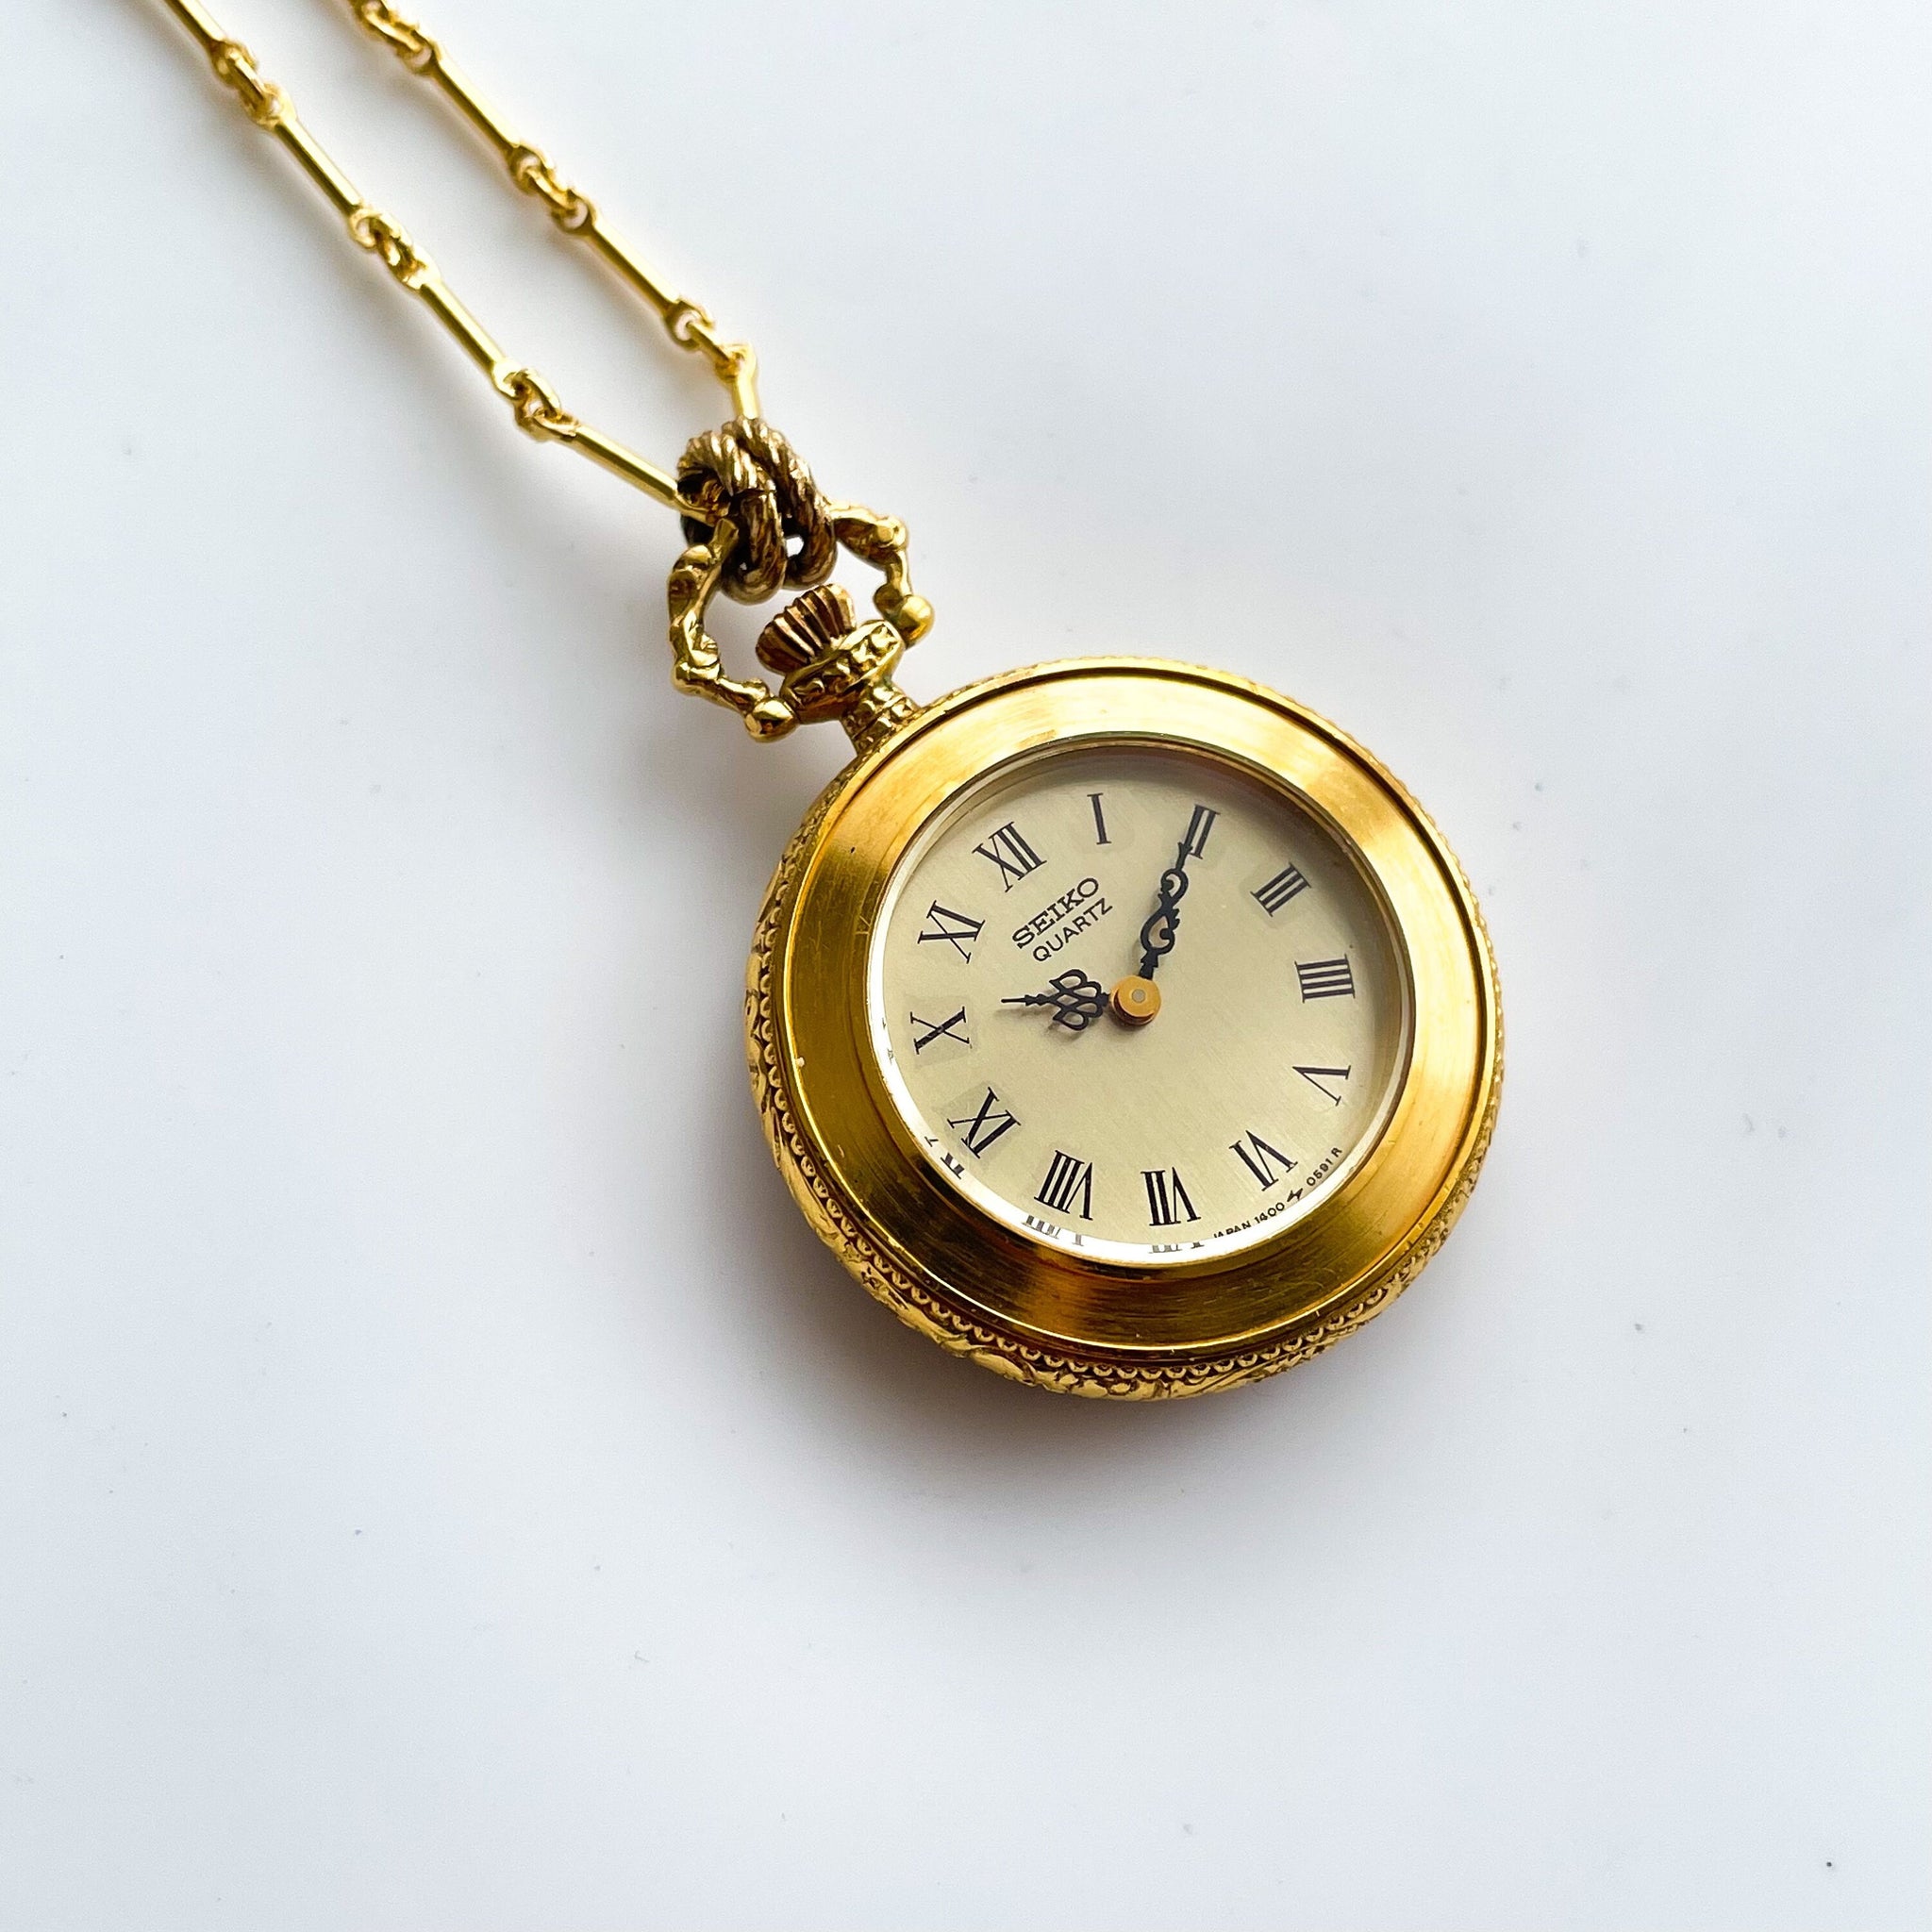 Vintage SEIKO Pendant Watch With Chain Necklace 17 Jewels - Etsy | Pendant  watches, Watch necklace, Beautiful watches